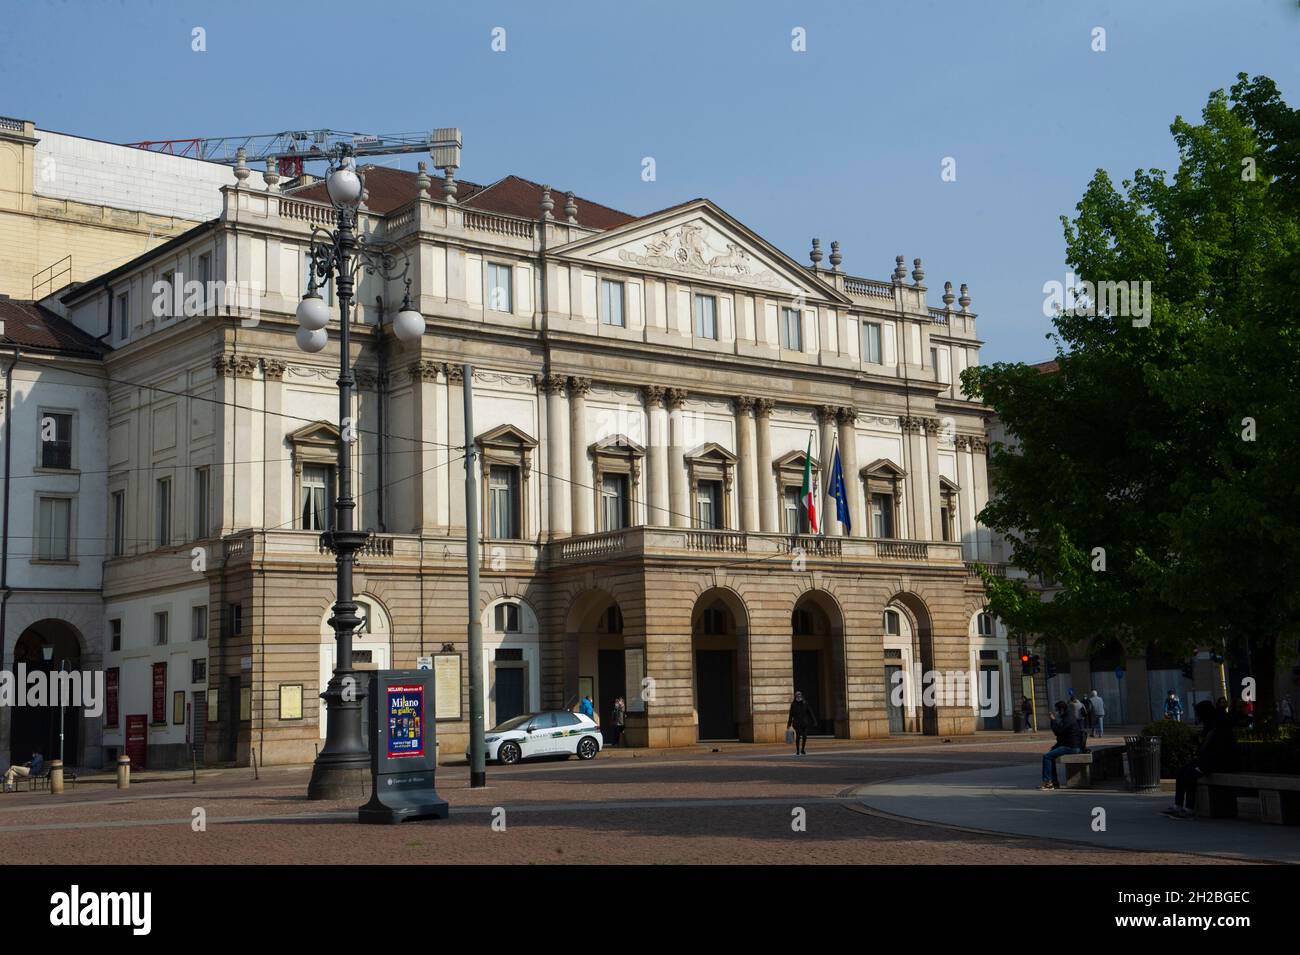 Europe, Italie, Lombardie, Milan, la Scala,Piazza Scala. Banque D'Images